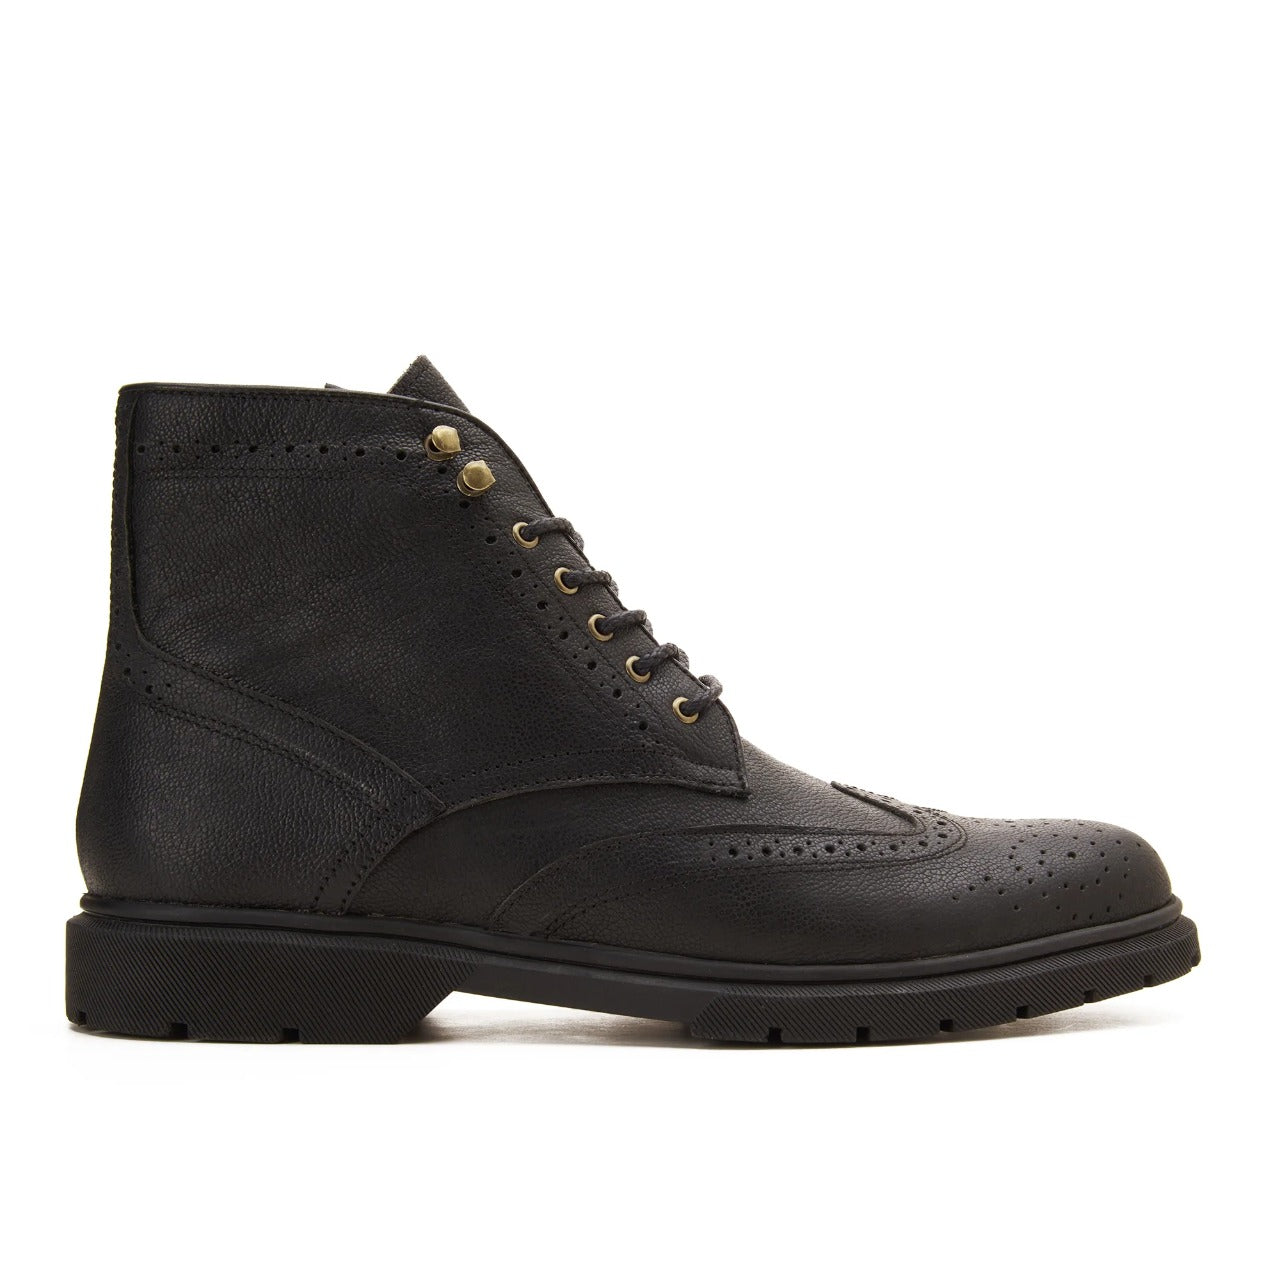 Oxford leather Boot with side zipper - Black